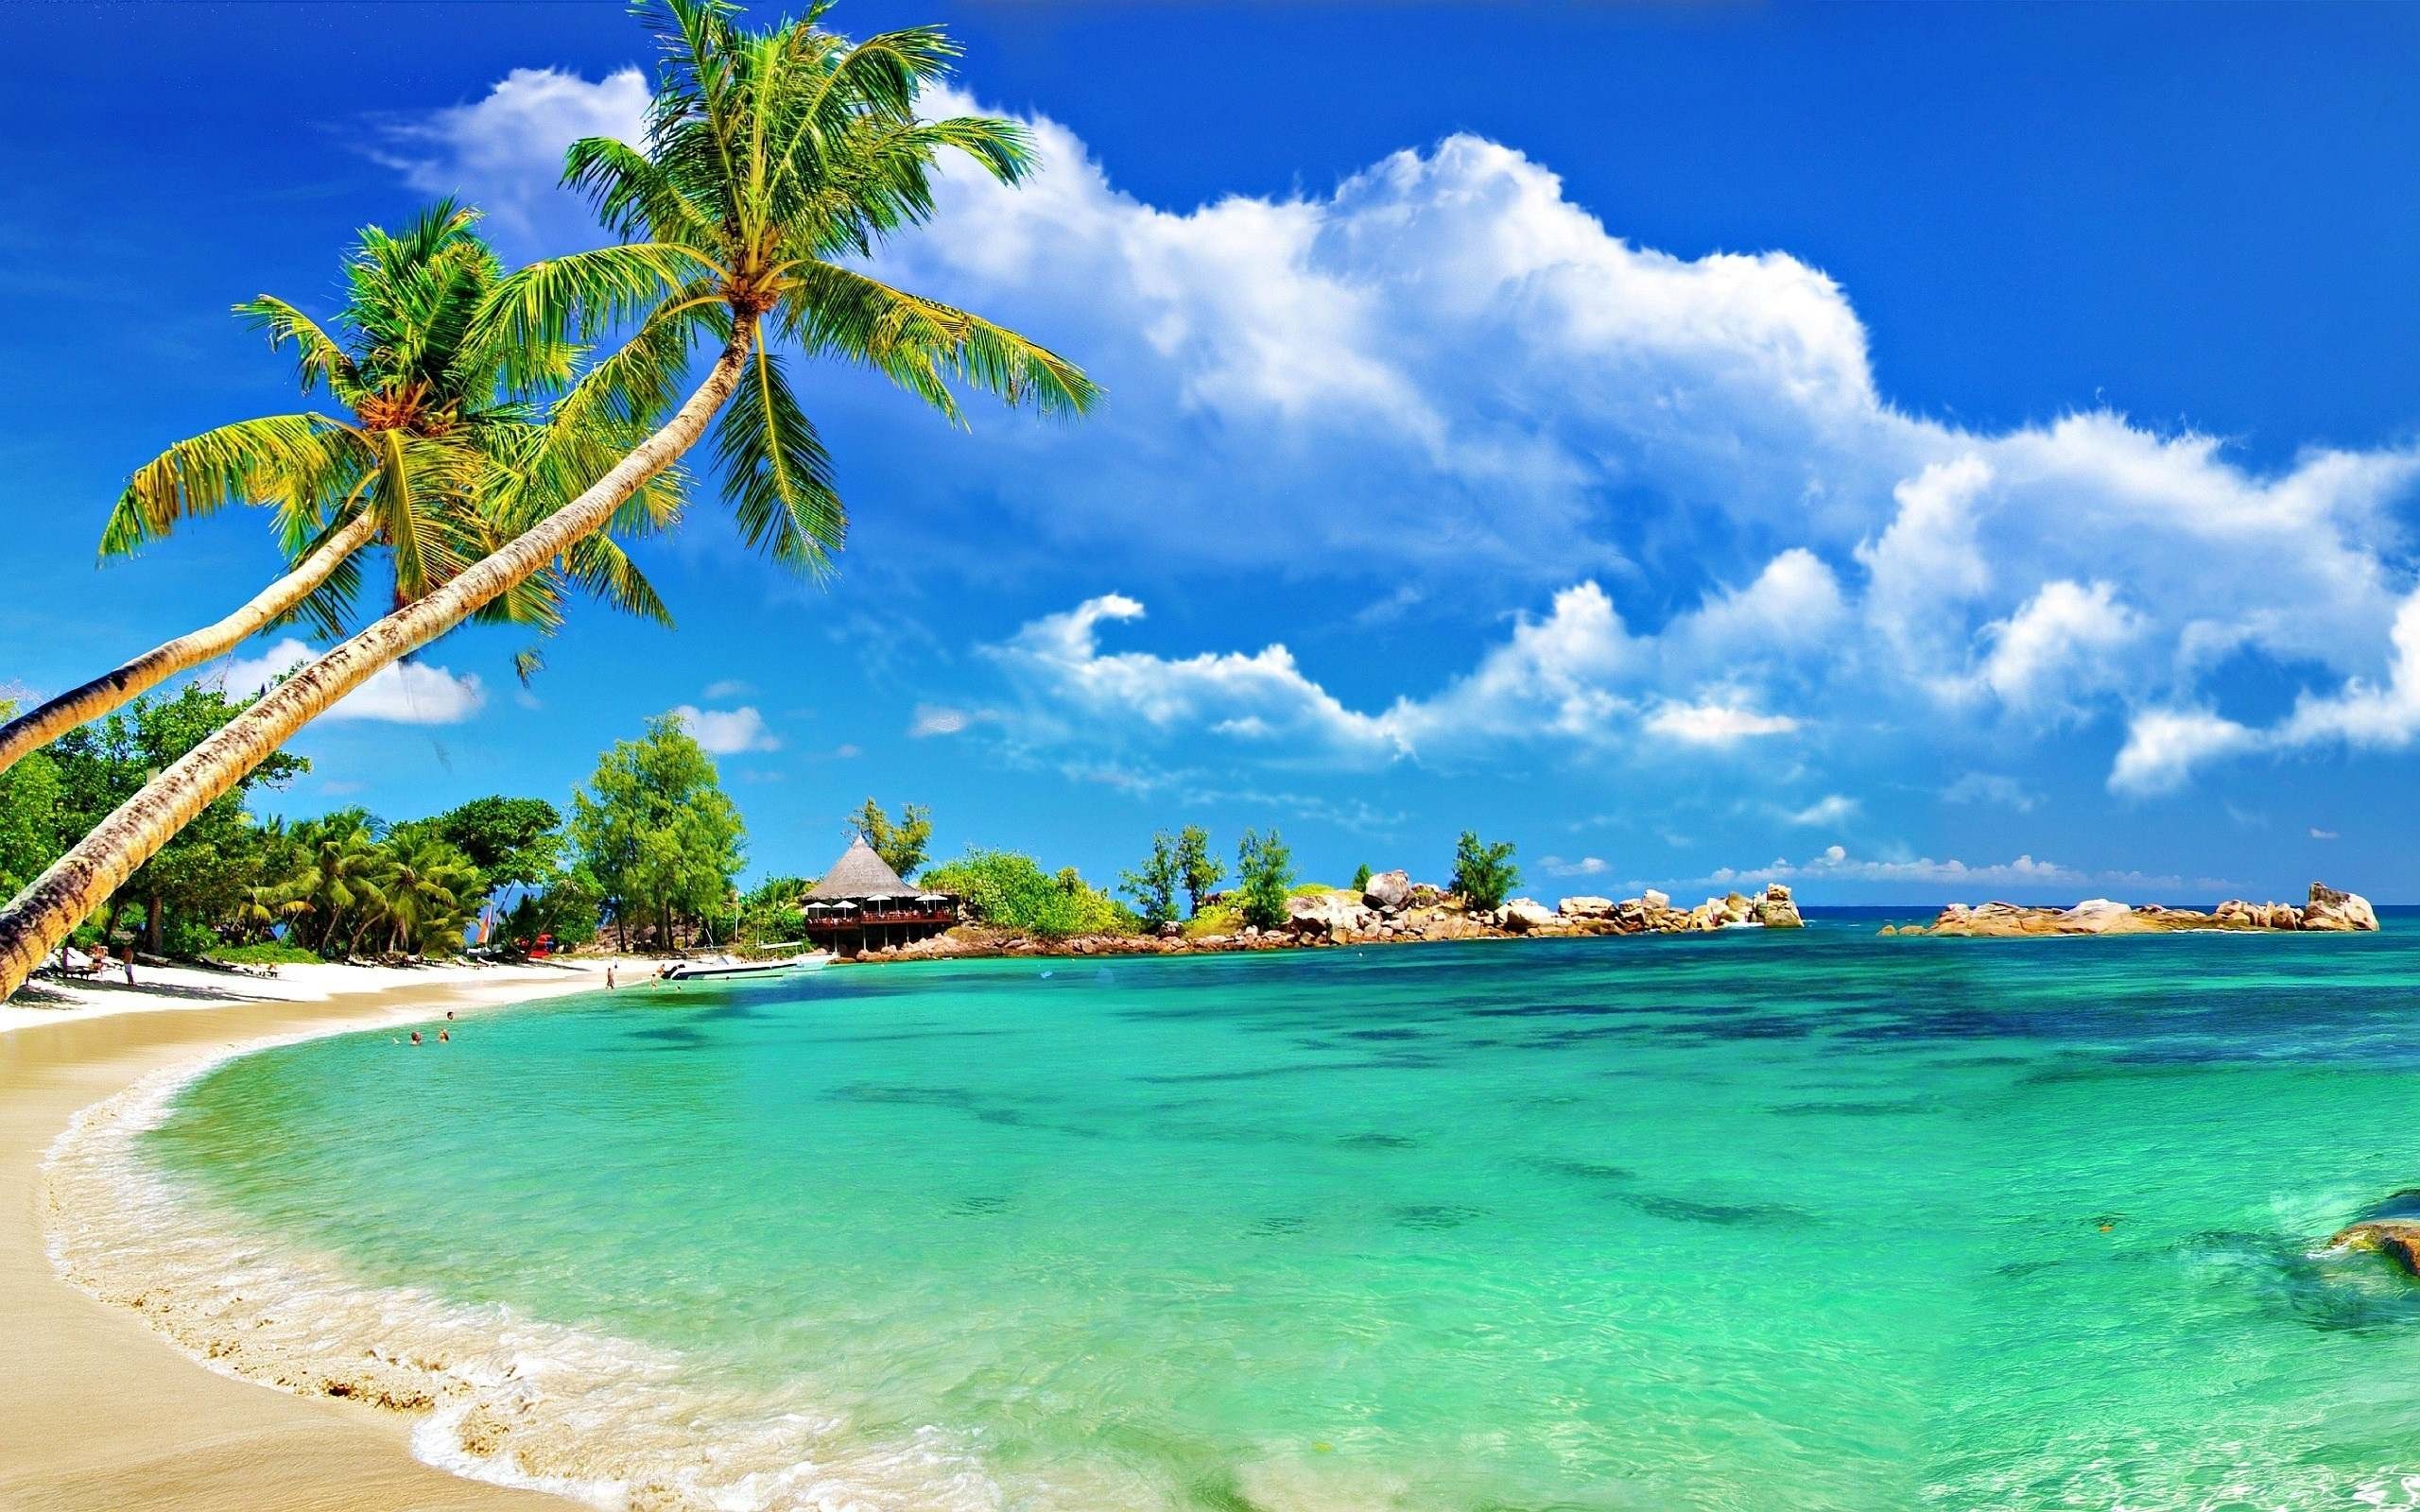 Awesome Tropical Beaches Full Screen High Resolution